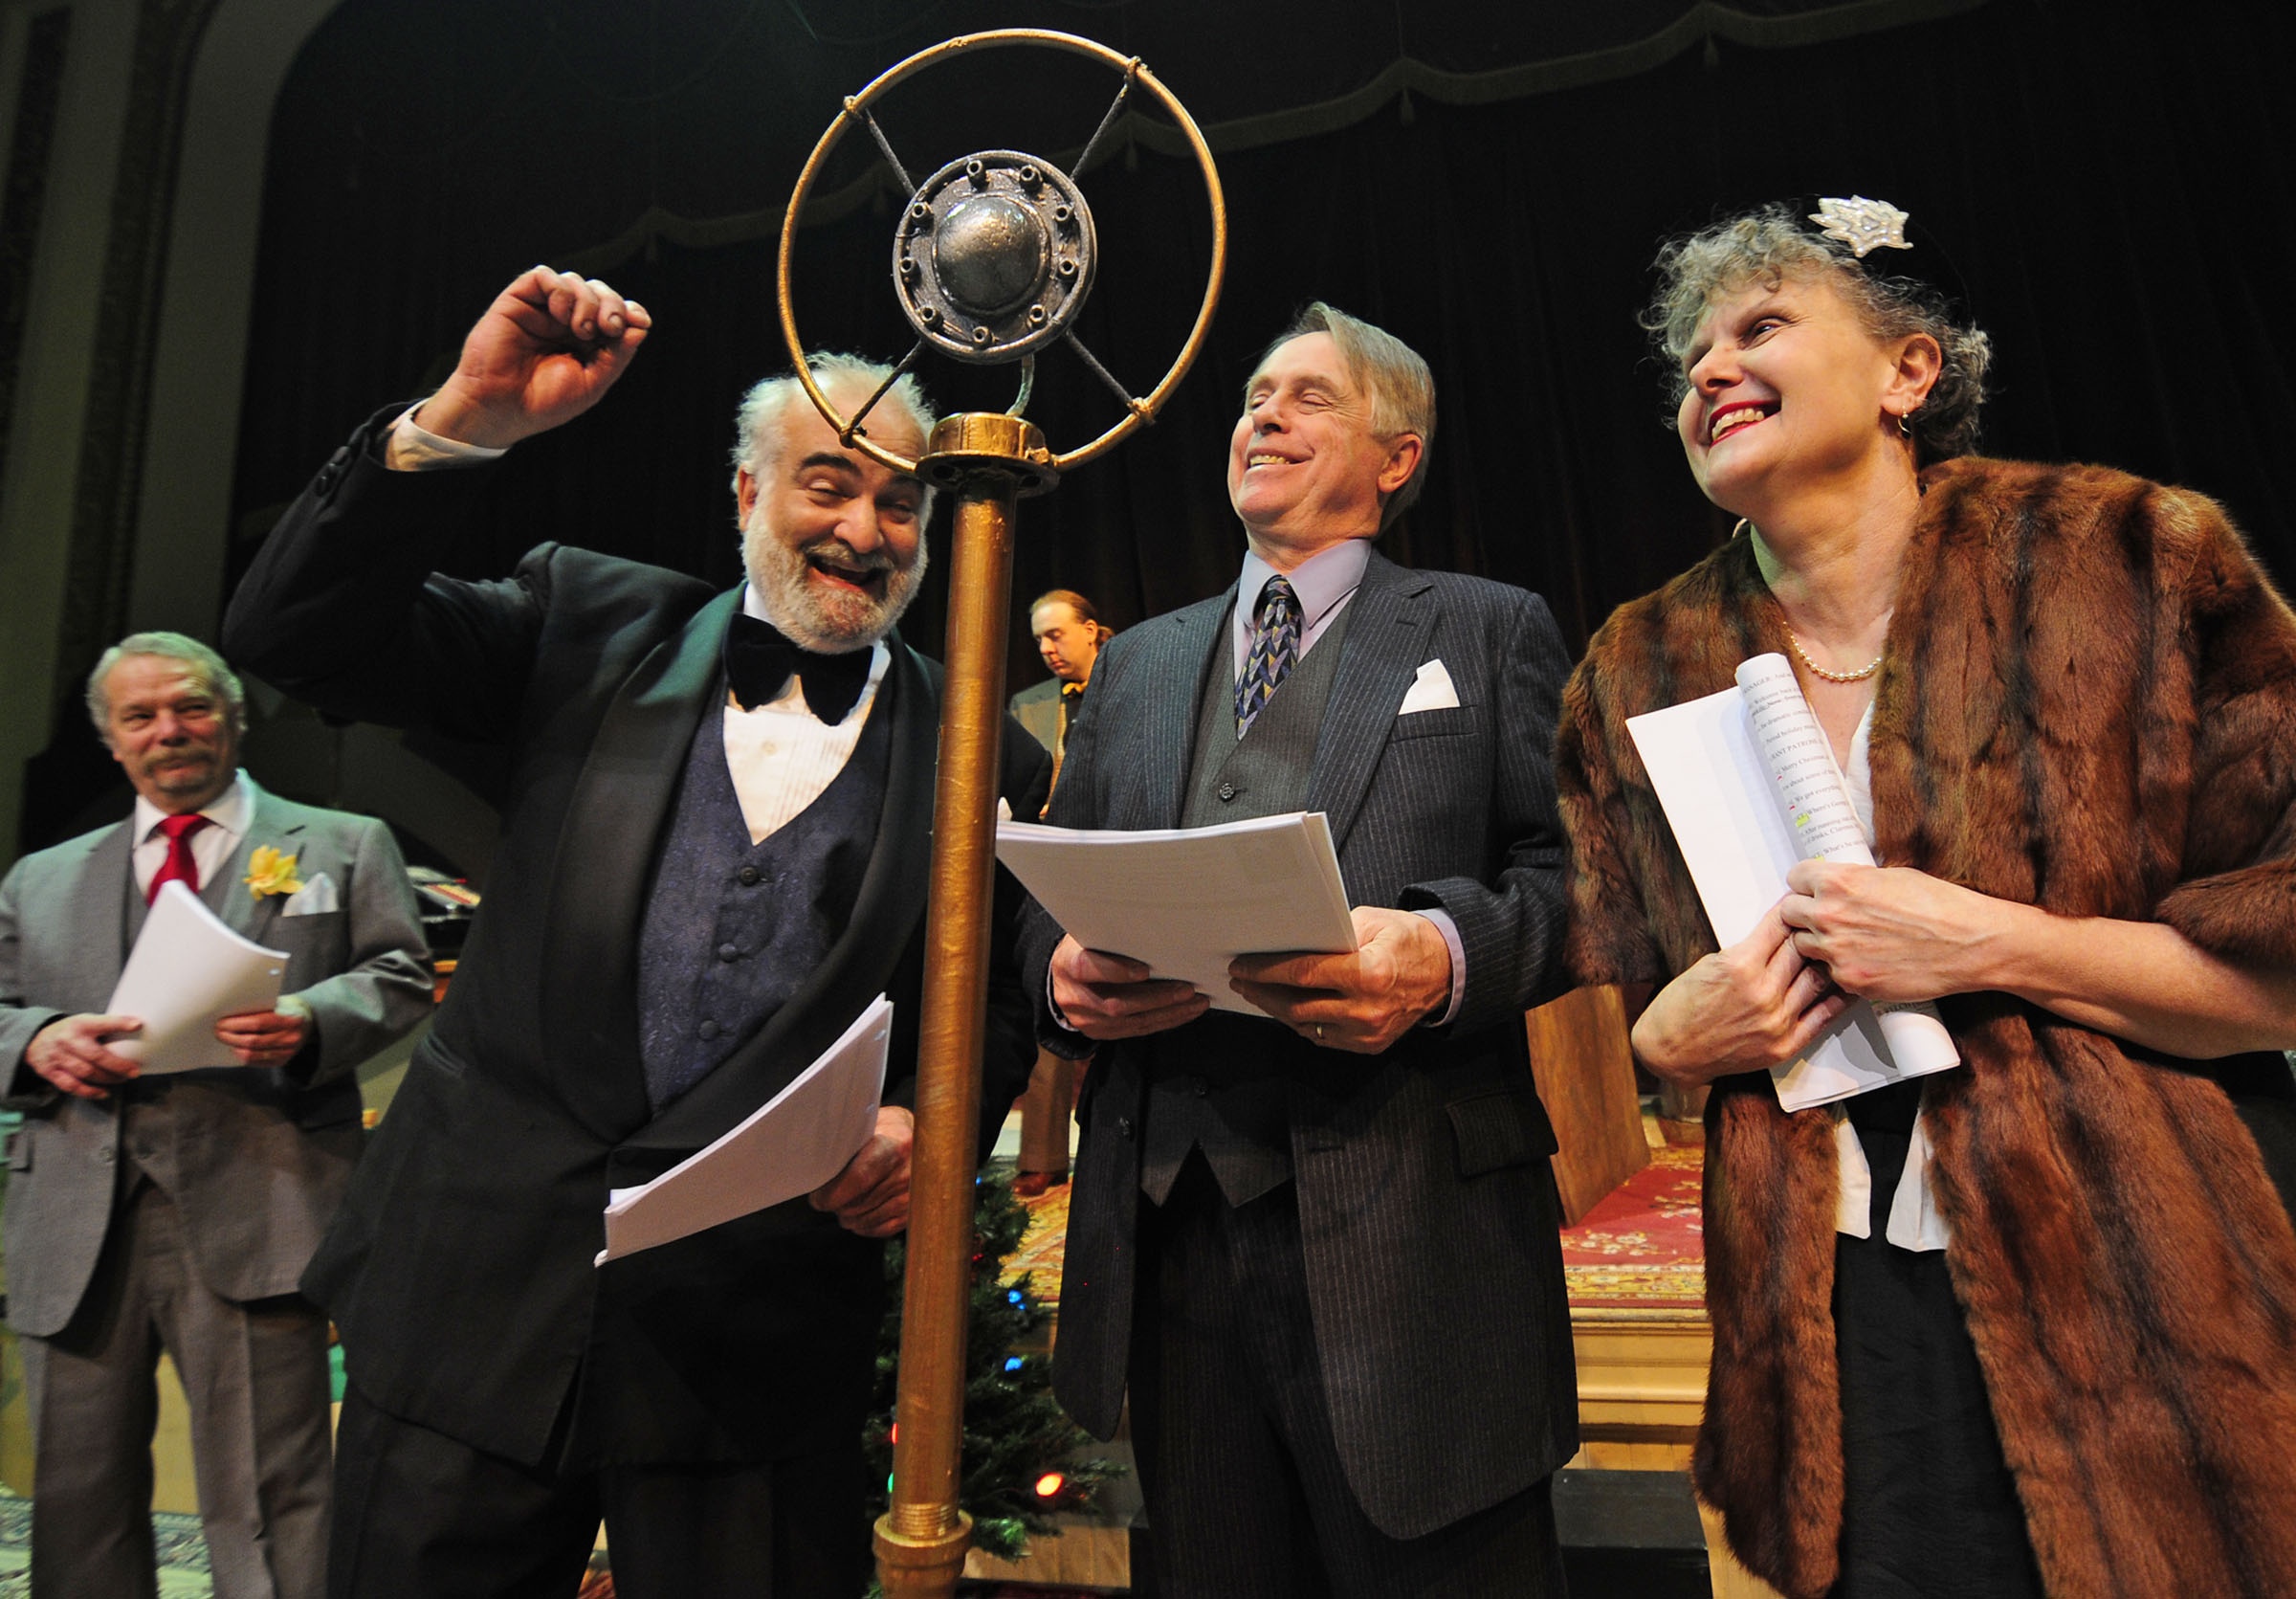 cast cheers for money being raised - photo by Stefan Hard, the Times Argus